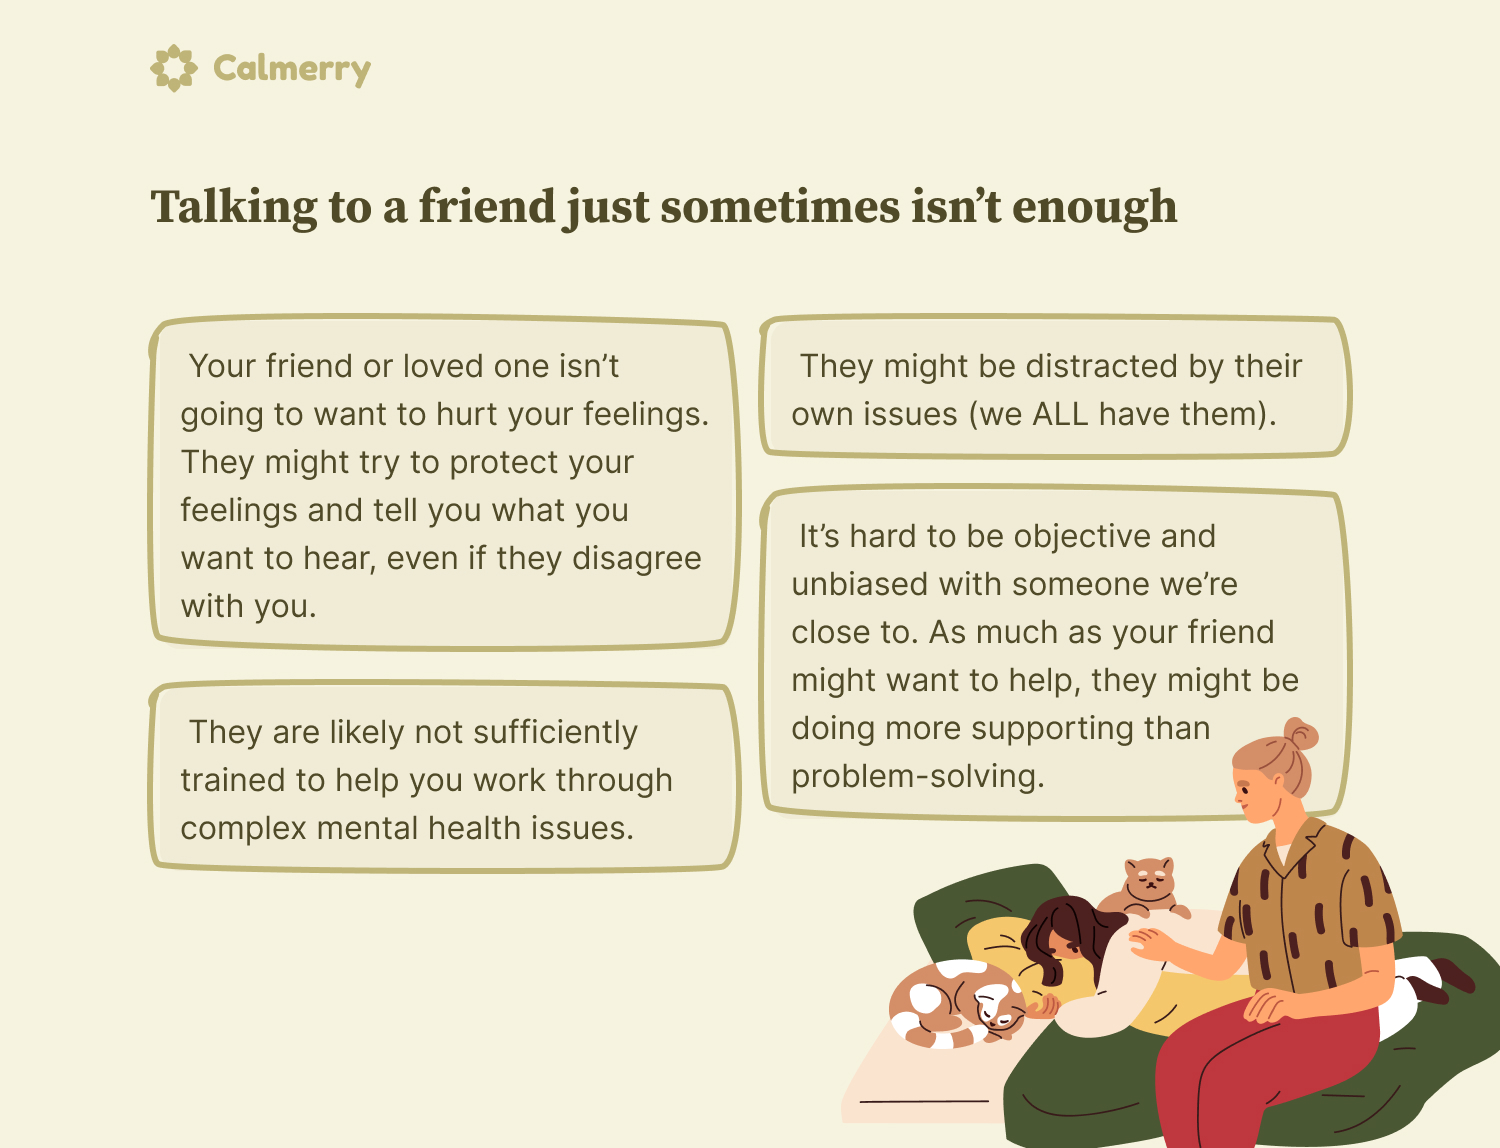 why talking to a friend sometimes isn’t enough